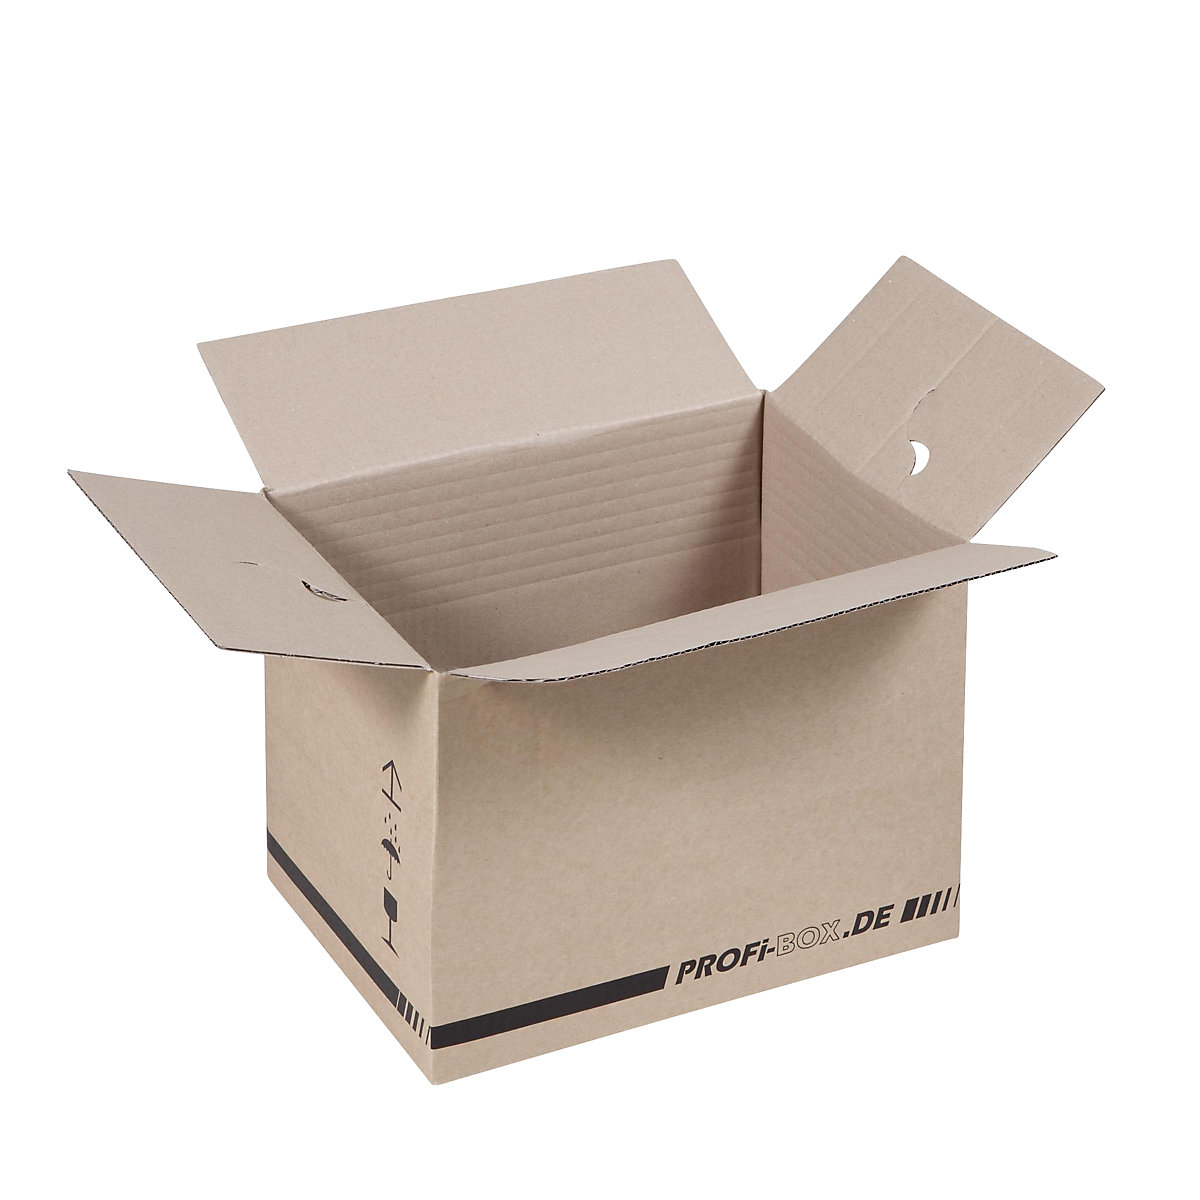 Professional boxes, made of single fluted cardboard, FEFCO 0701, internal dimensions 305 x 215 x 220 mm, pack of 50-11